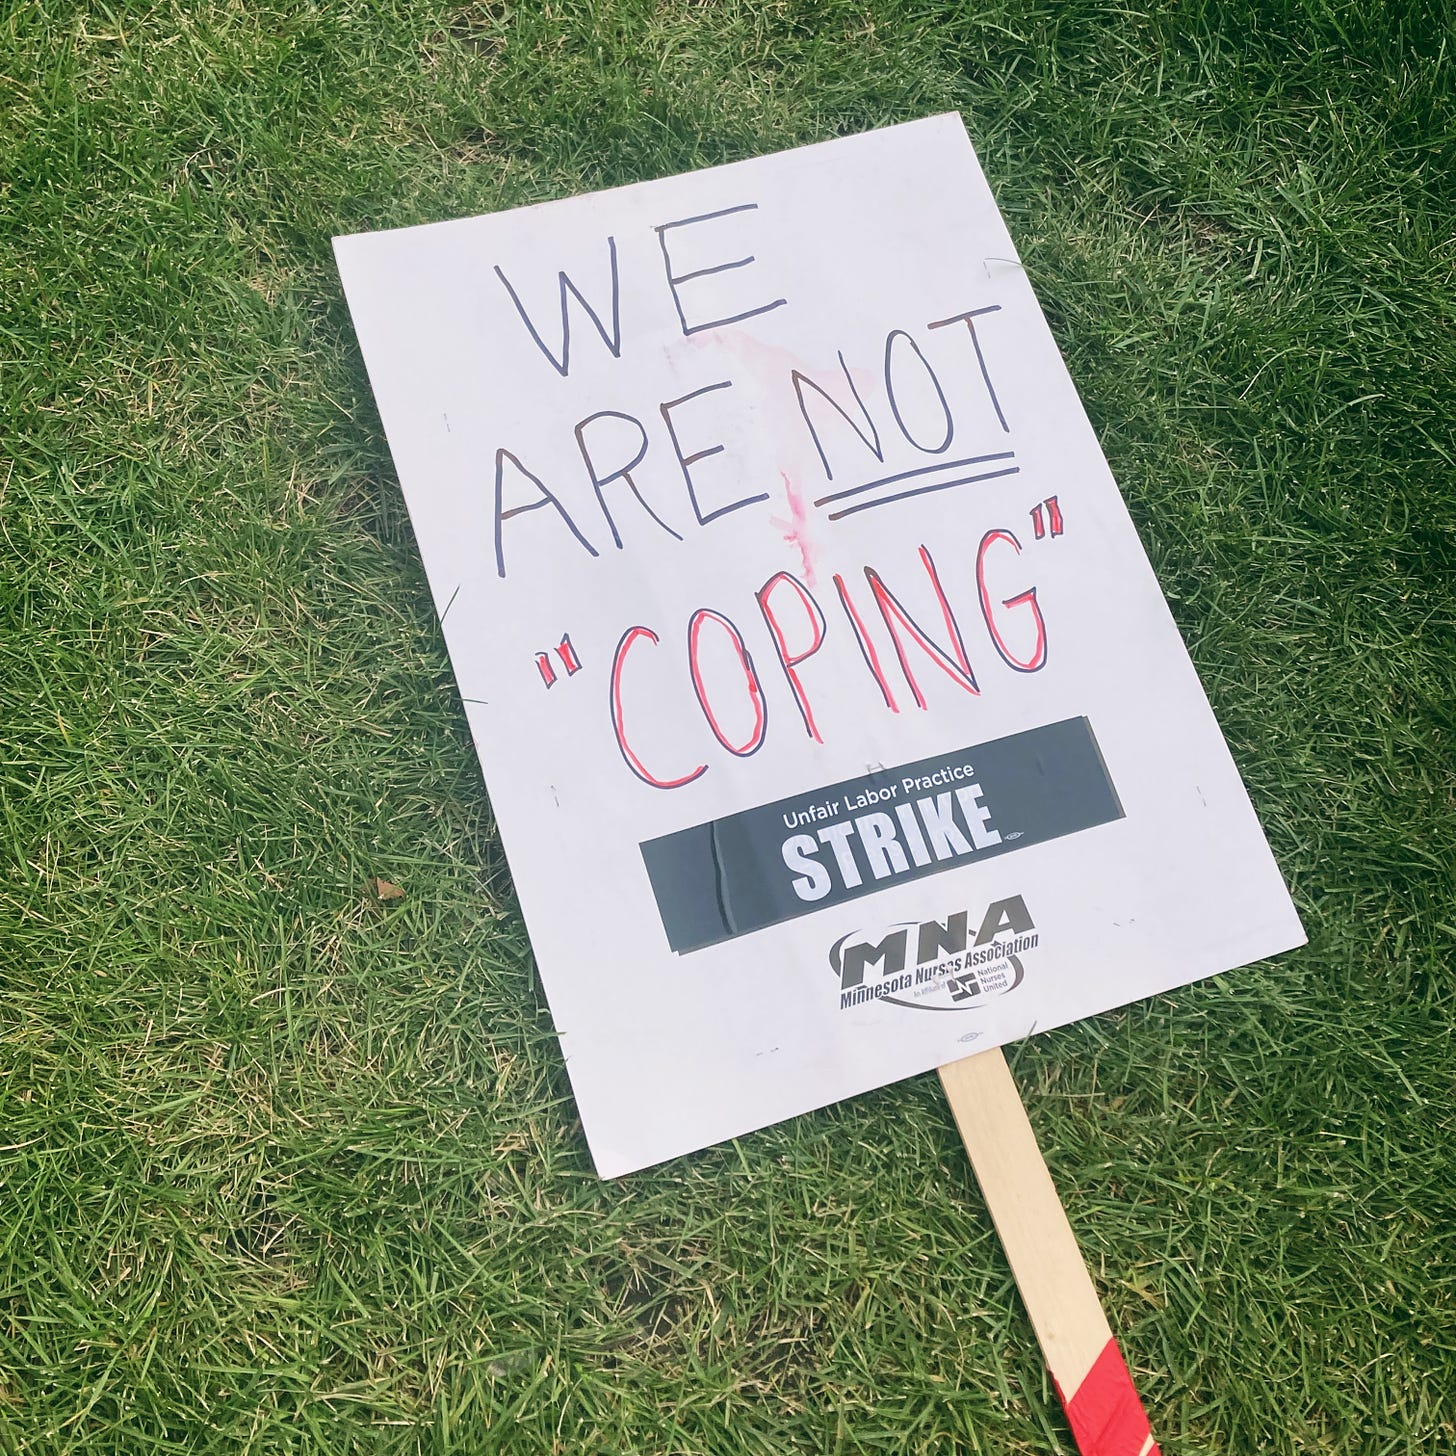 a picket sign lays on the grass and it reads "WE ARE NOT "COPING" in written marker. it also says "Unfair labor practice STRIKE" MNA Minnesota Nurses Assocation